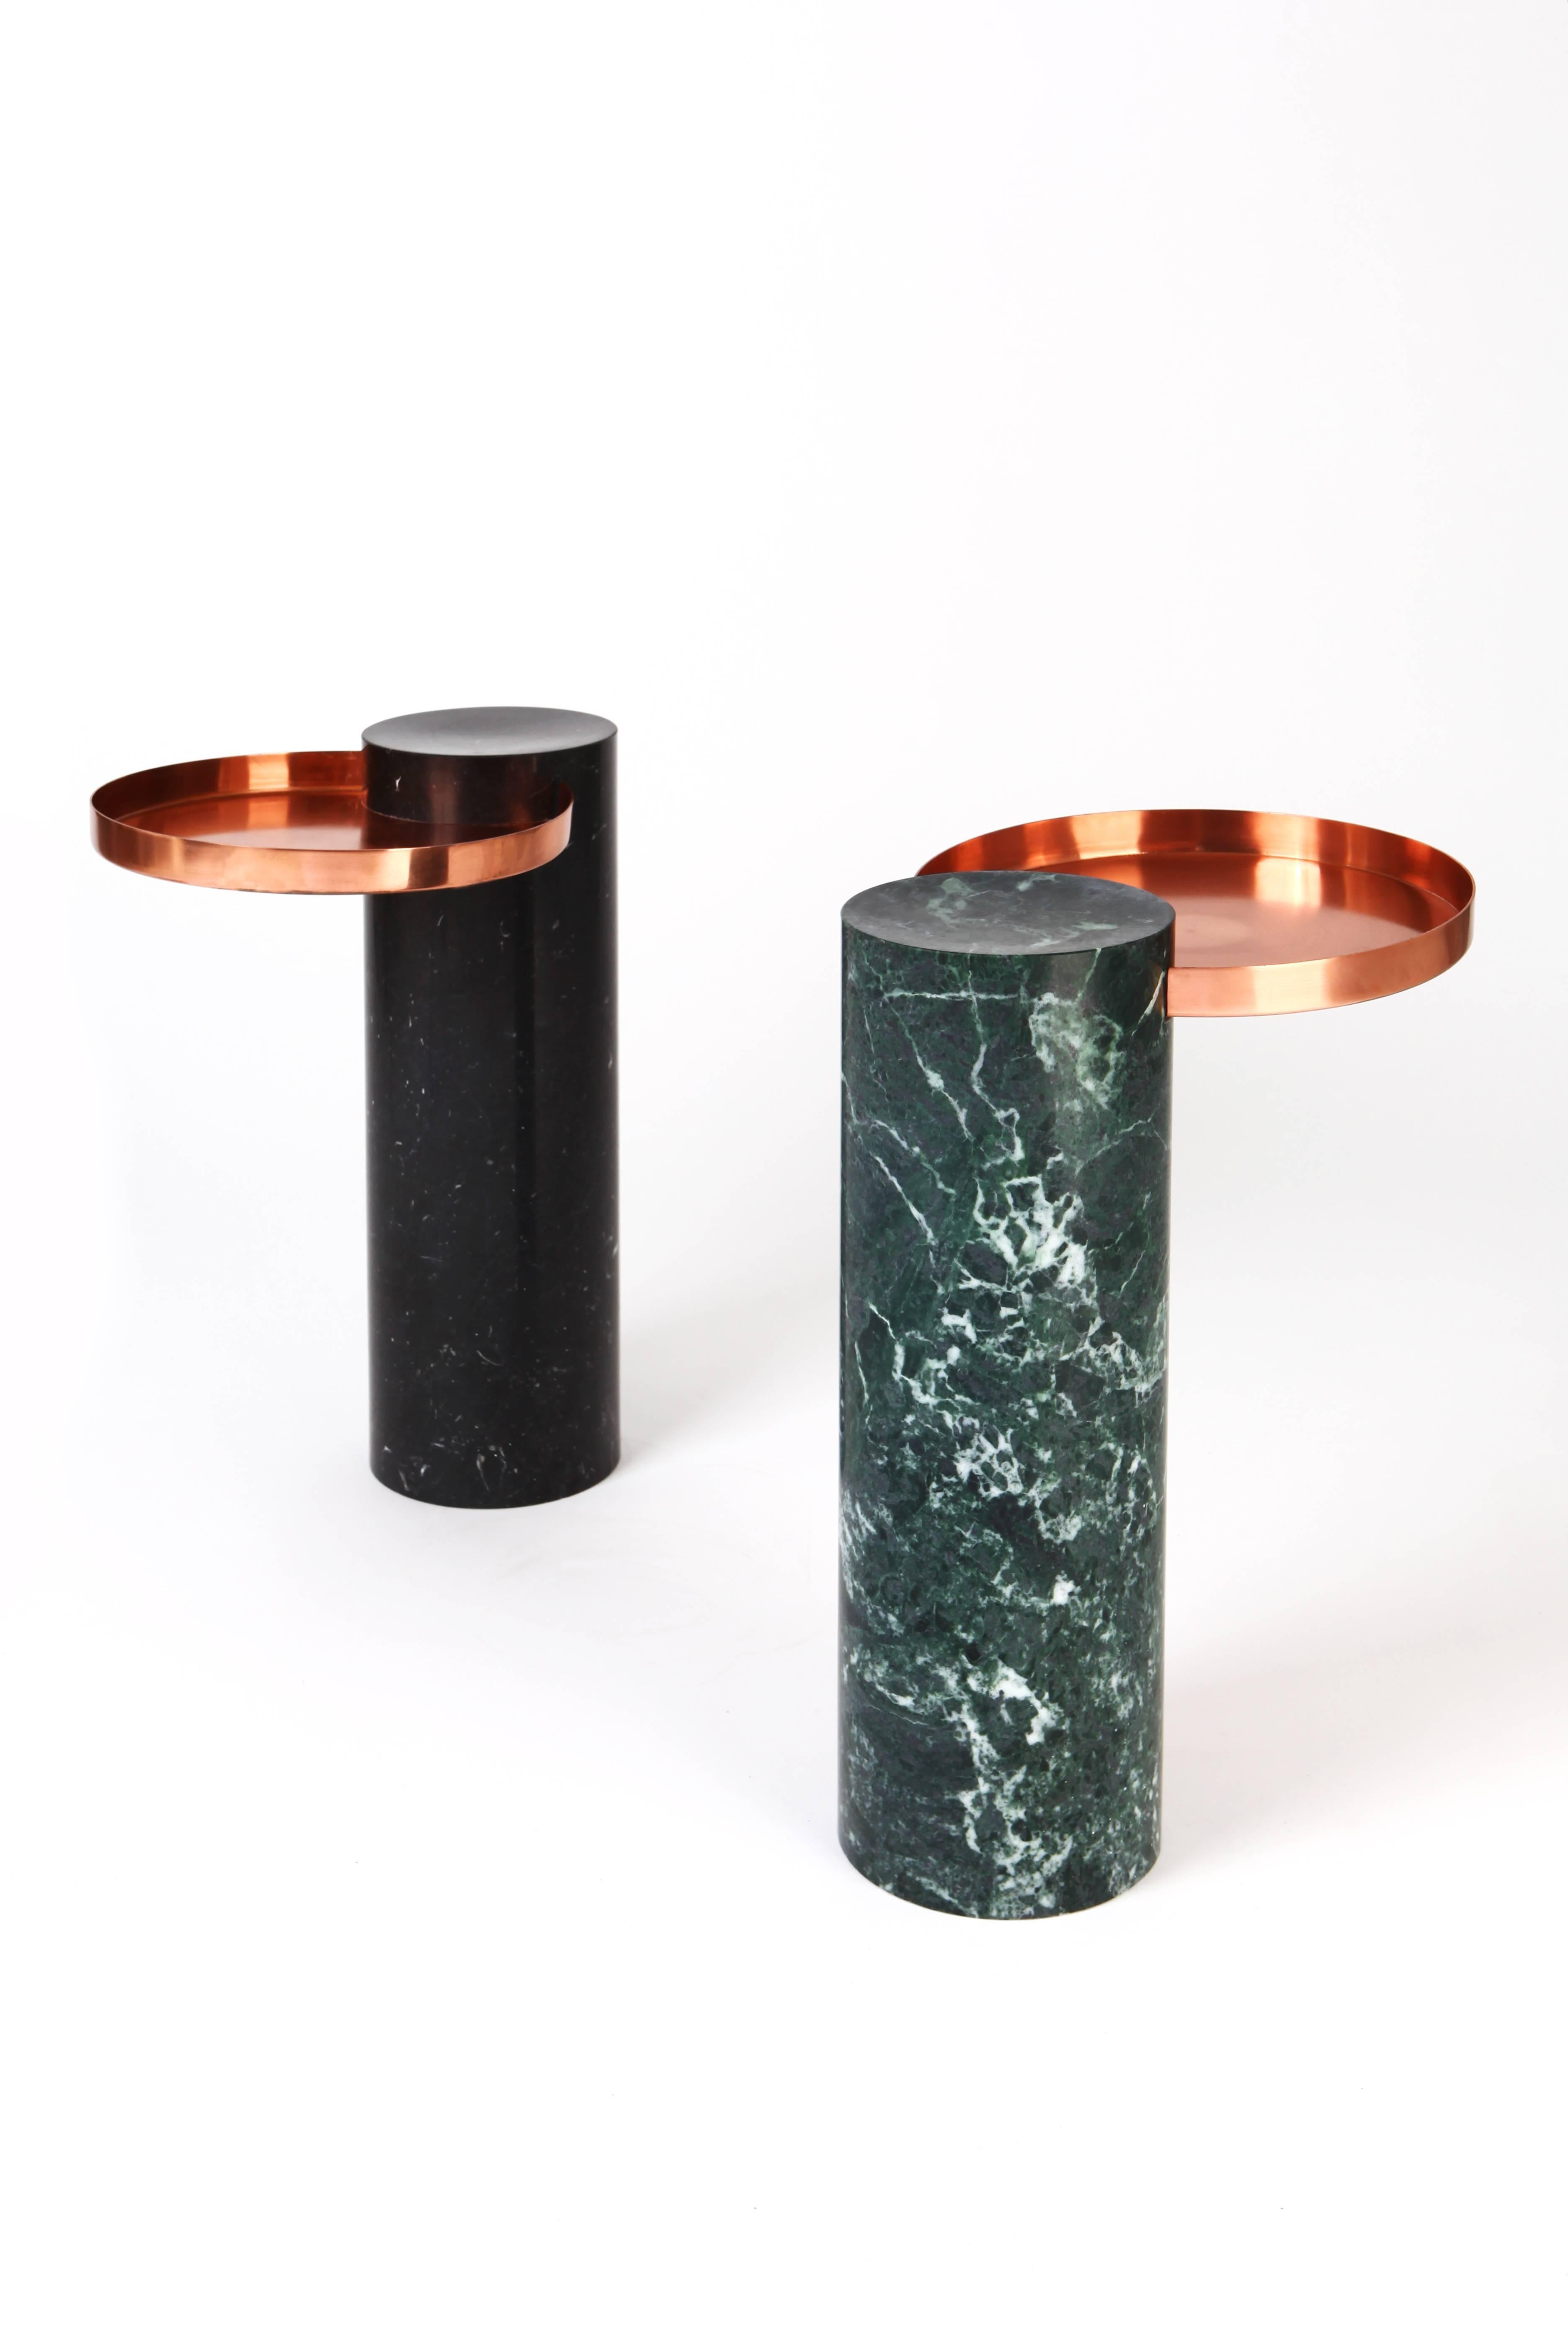 Pair of contemporary guéridons, Sebastian Herkner

The salute table exists in 3 sizes, 3 different marbles for the column and 4 different finishes for the tray for a virtually endless number of configurations. In addition, Salute can be made